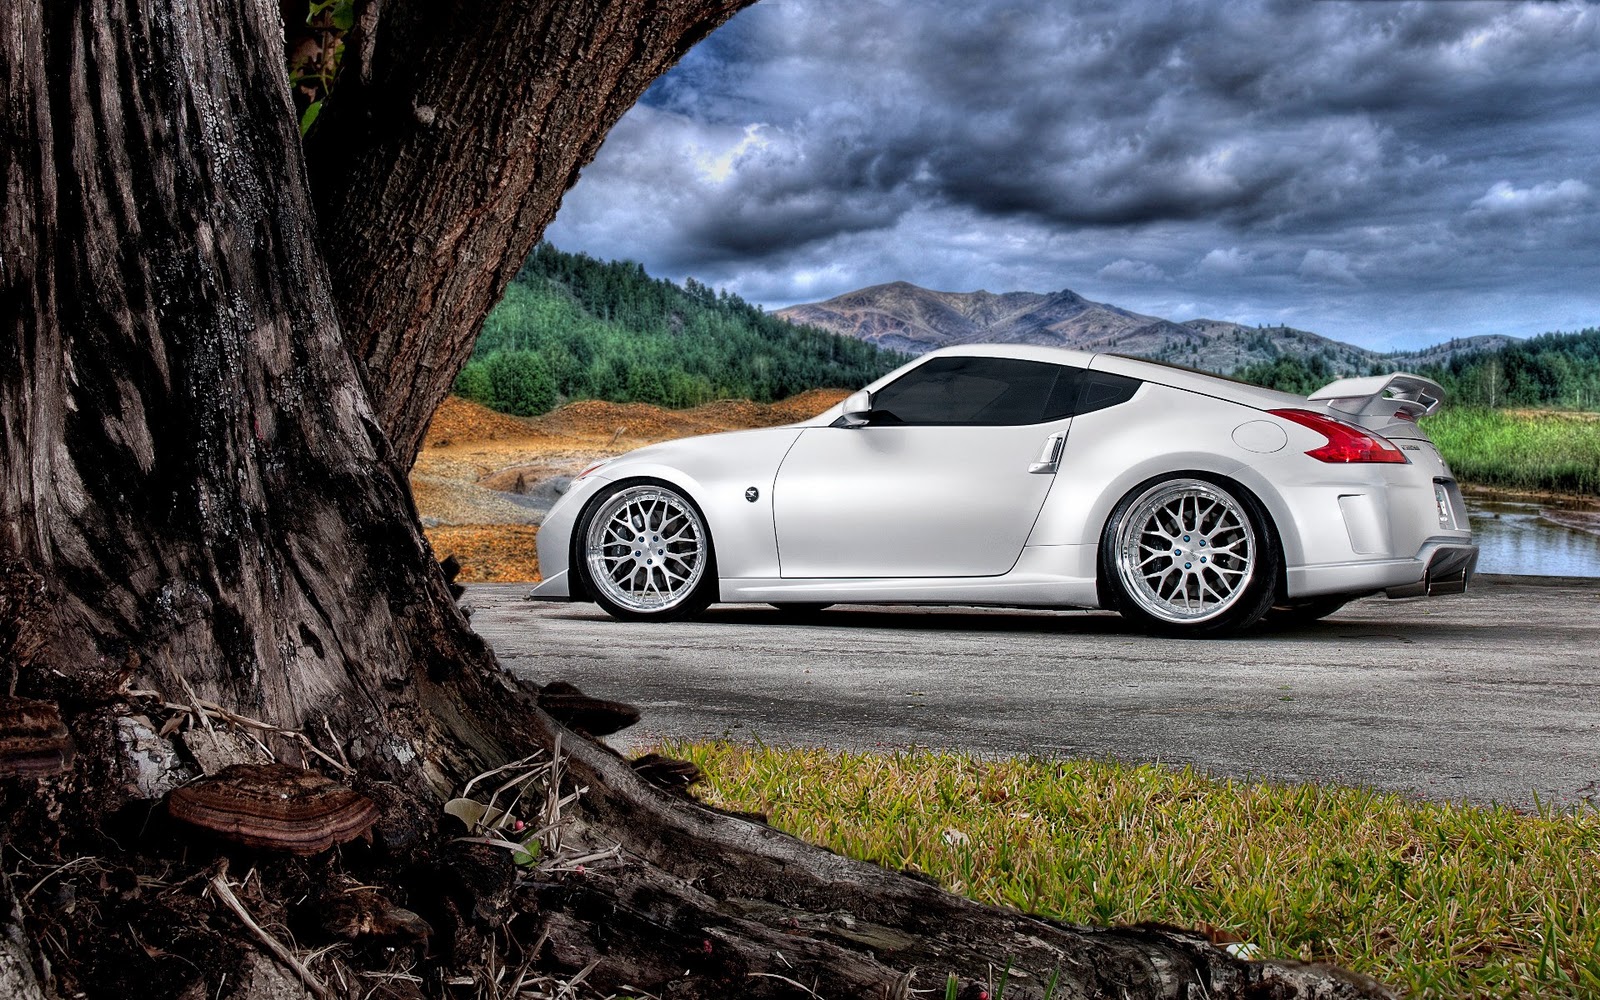 Free Download White Nissan 370z Hd Wallpapers Download Wallpapers Images, Photos, Reviews